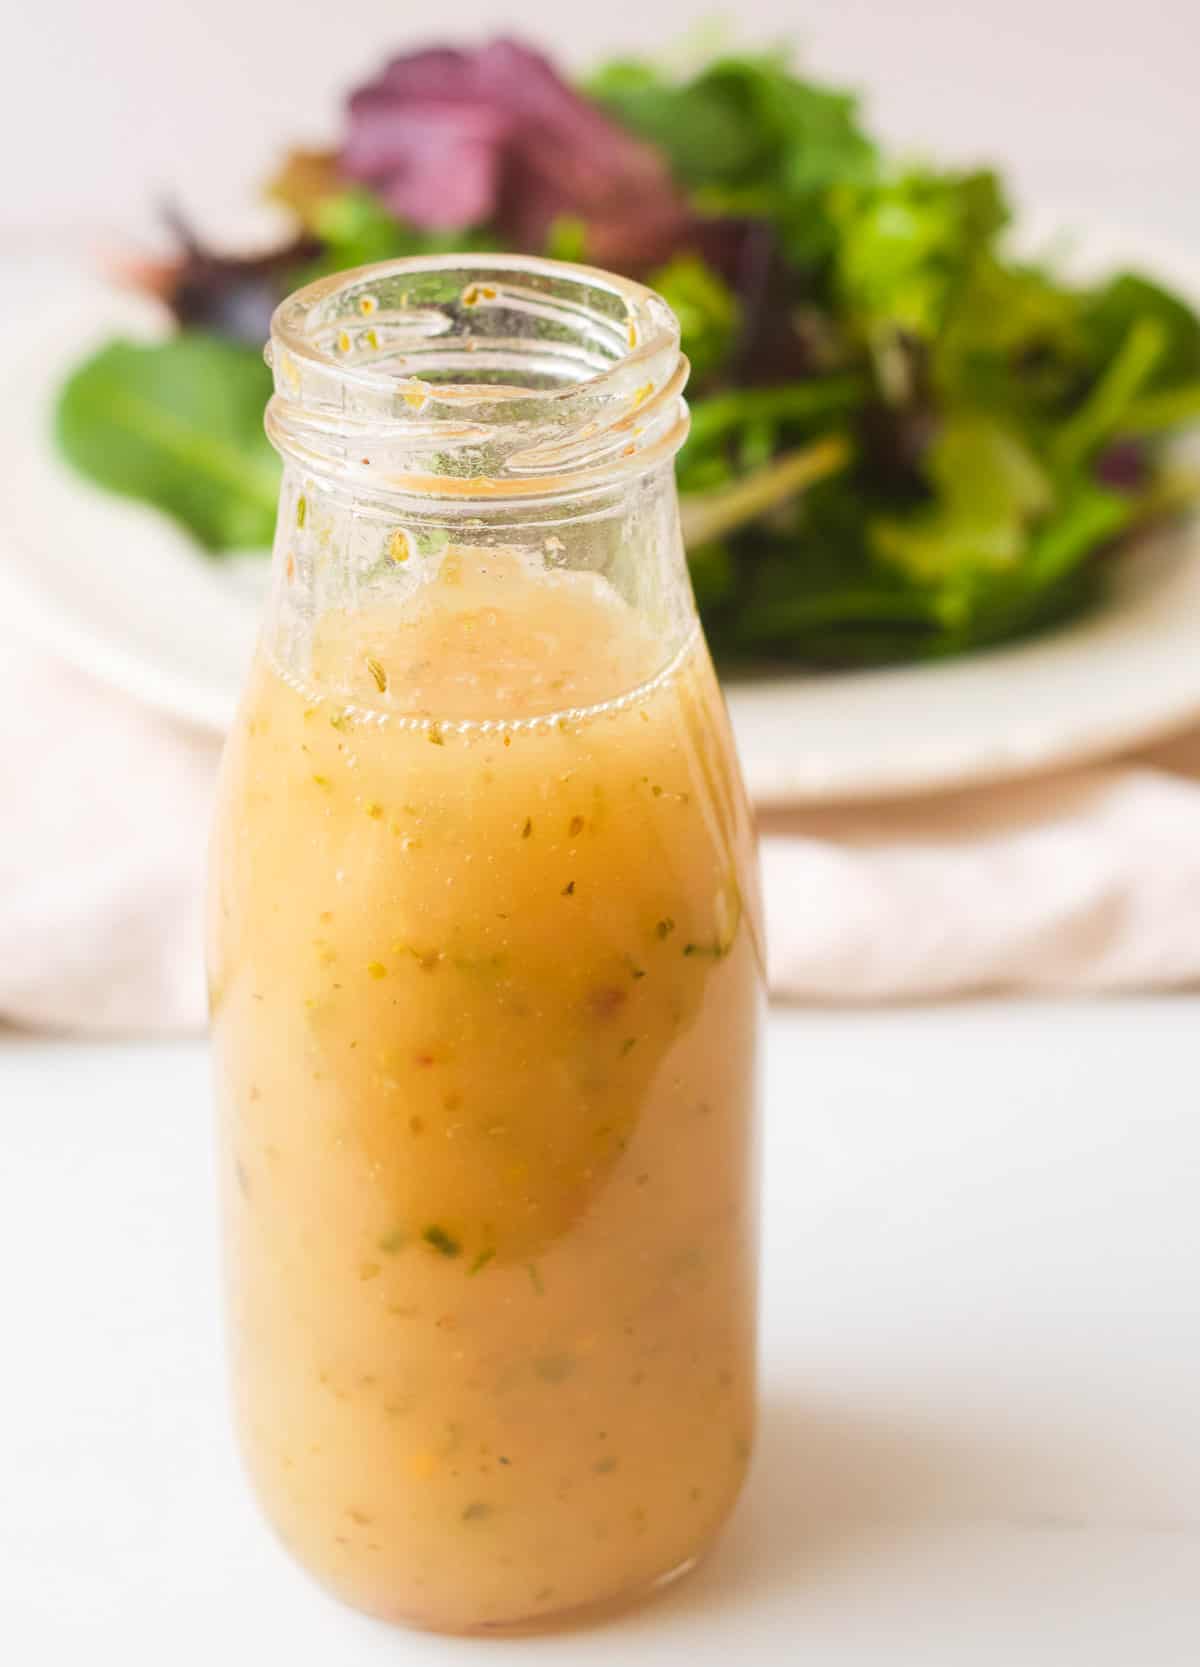 Vegan Italian dressing in a bottle with a side salad. 